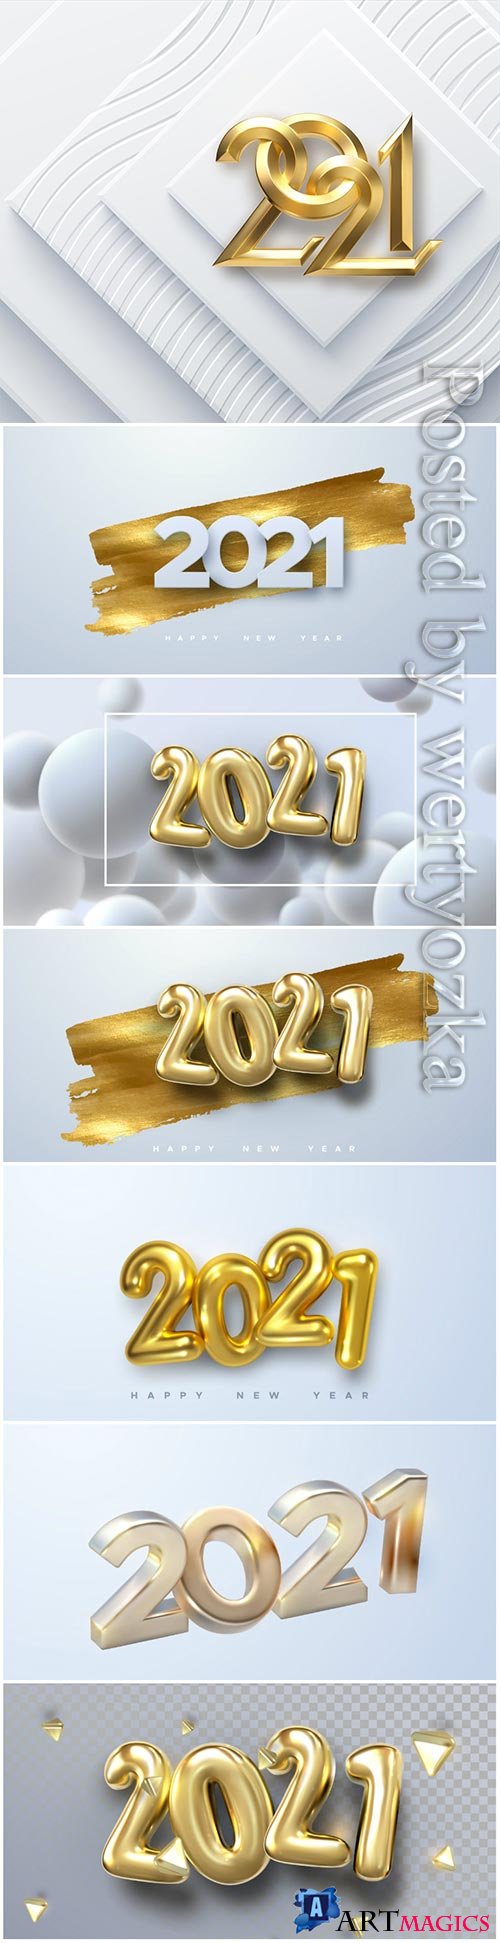 Elegant numbers 2021 for new year vector illustration